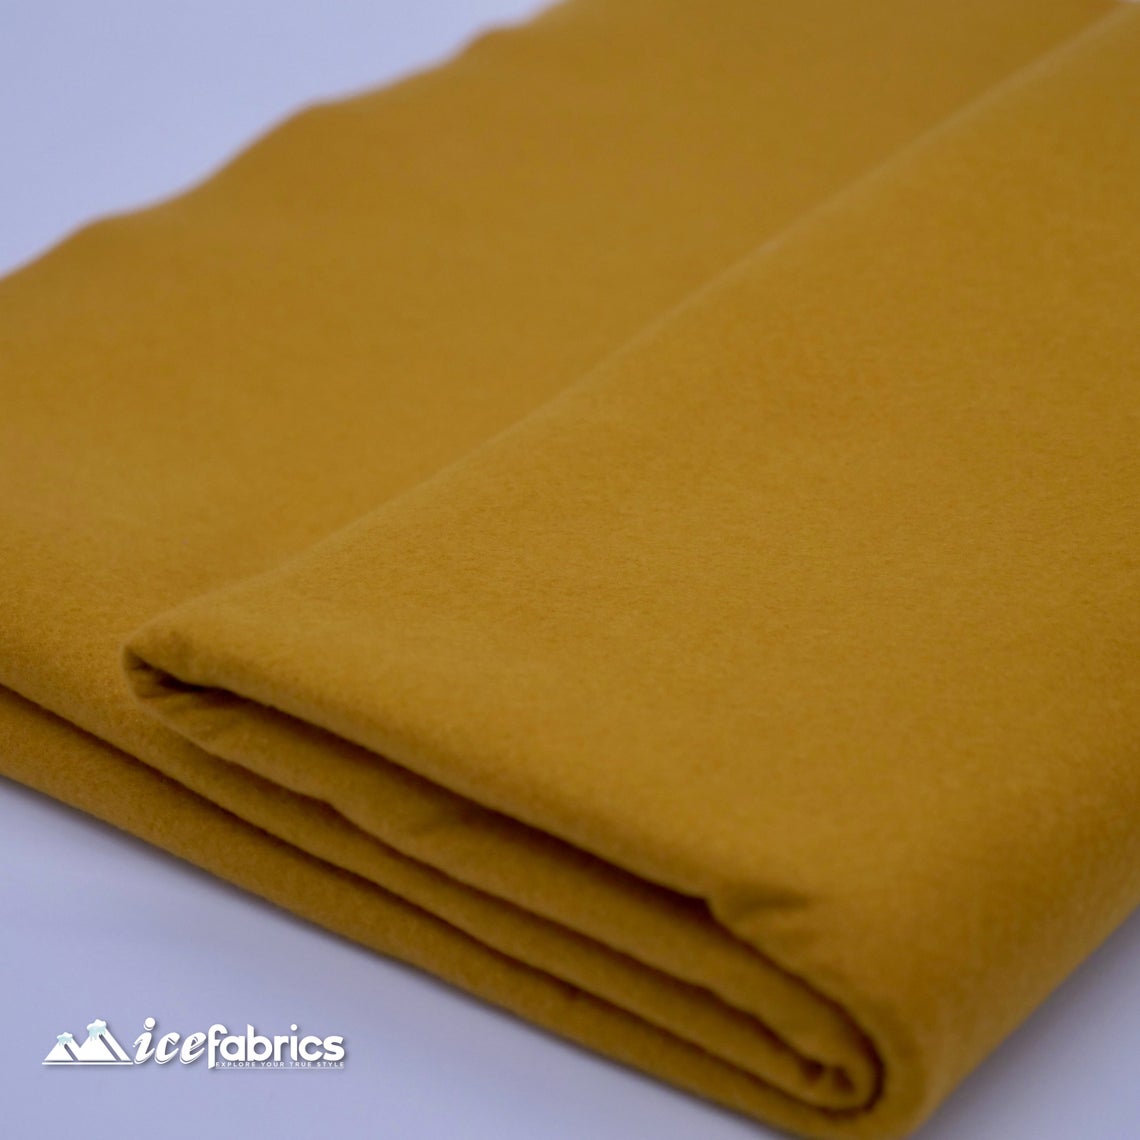 72" Wide 1.6 mm Thick Acrylic Gold Felt Fabric By The YardICE FABRICSICE FABRICSPer Yard1.6mm Thick72" Wide 1.6 mm Thick Acrylic Gold Felt Fabric By The Yard ICE FABRICS